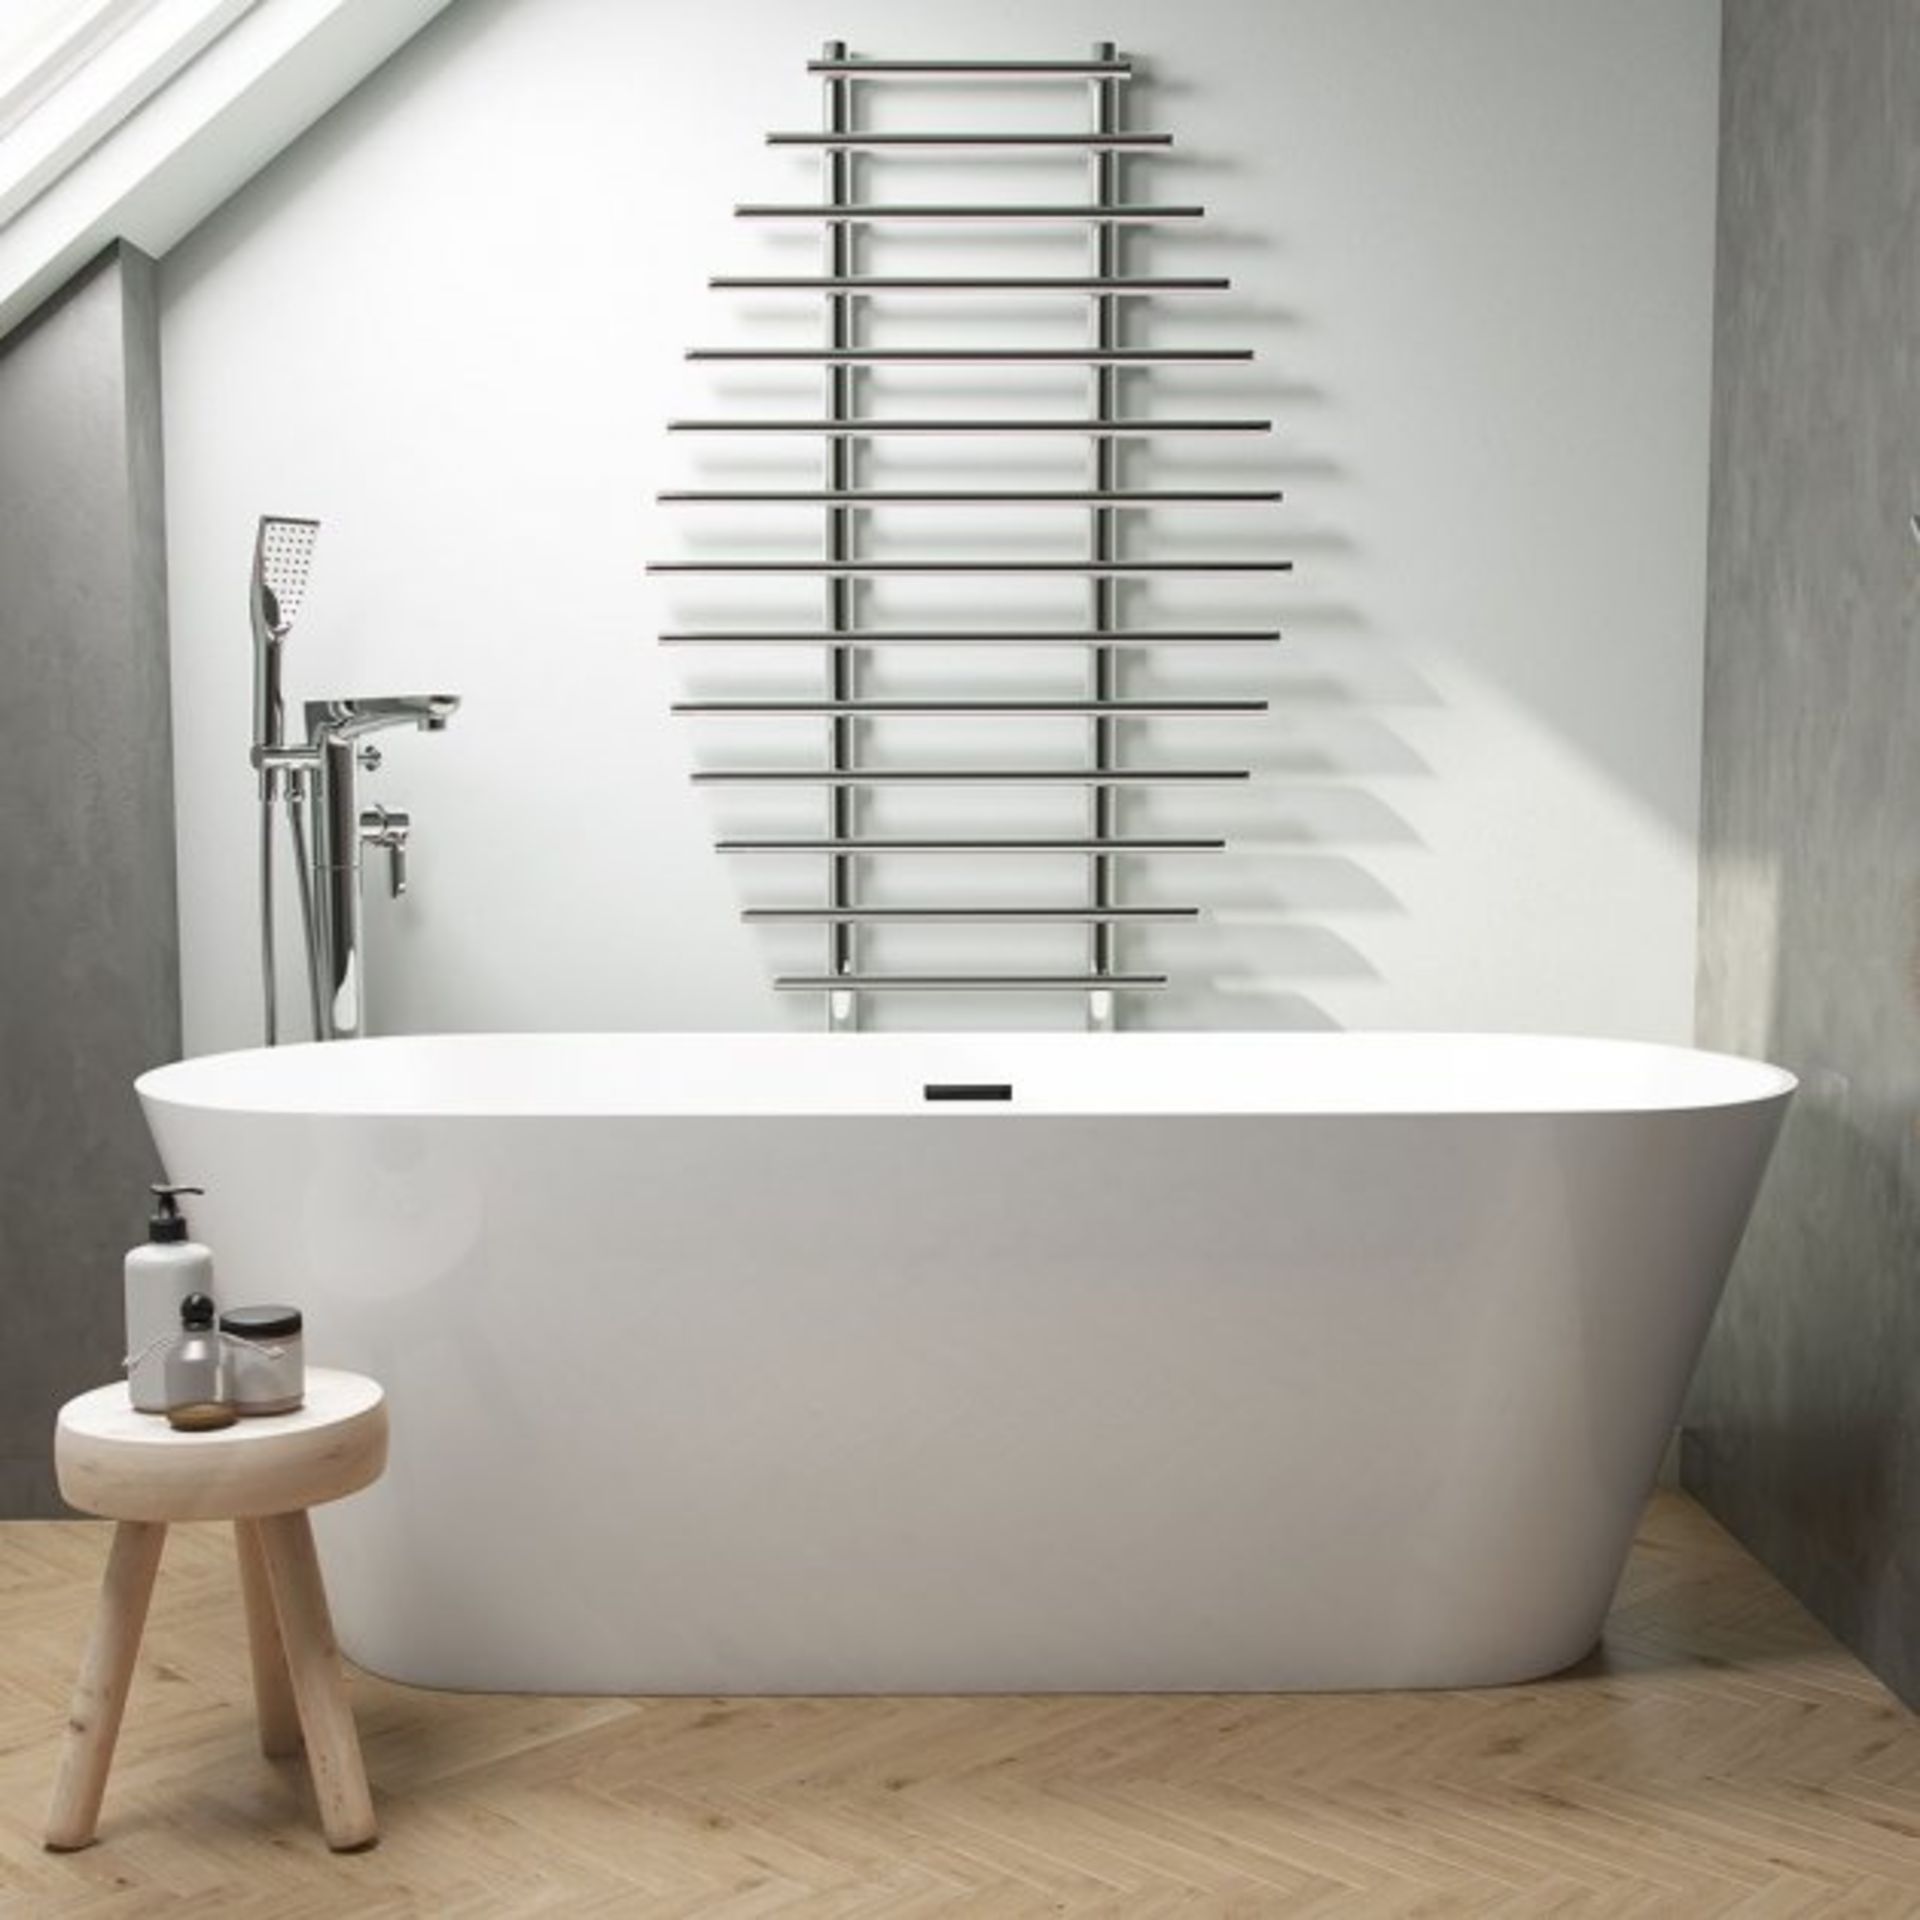 1 x Synergy Lugano 1700mm Freestanding Double Ended Contemporary Bath - New Boxed Stock - RRP £1,320